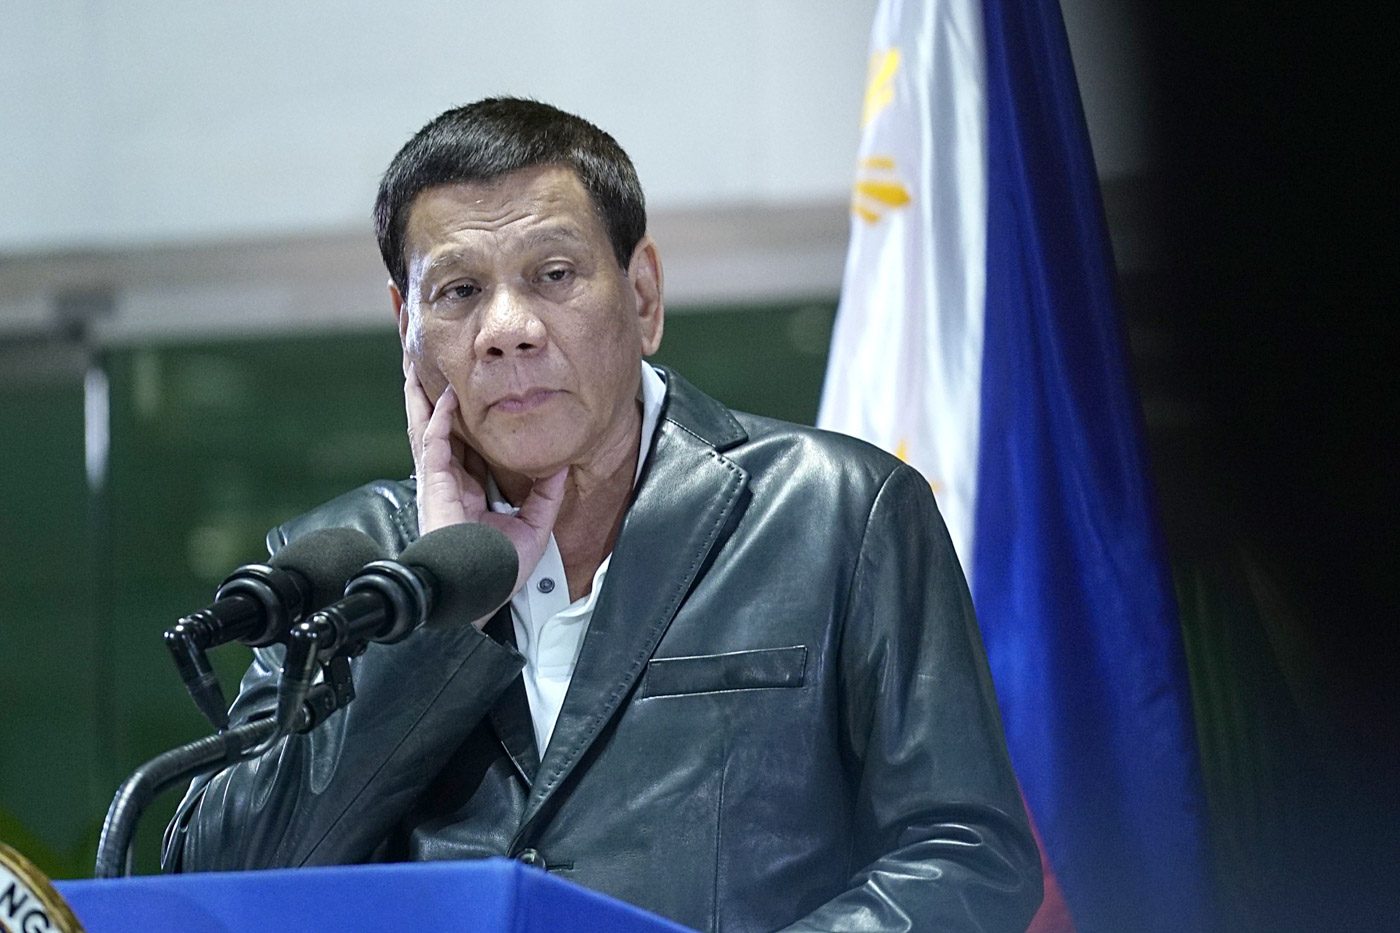 Duterte says no fight with priests: ‘I respect the Church’